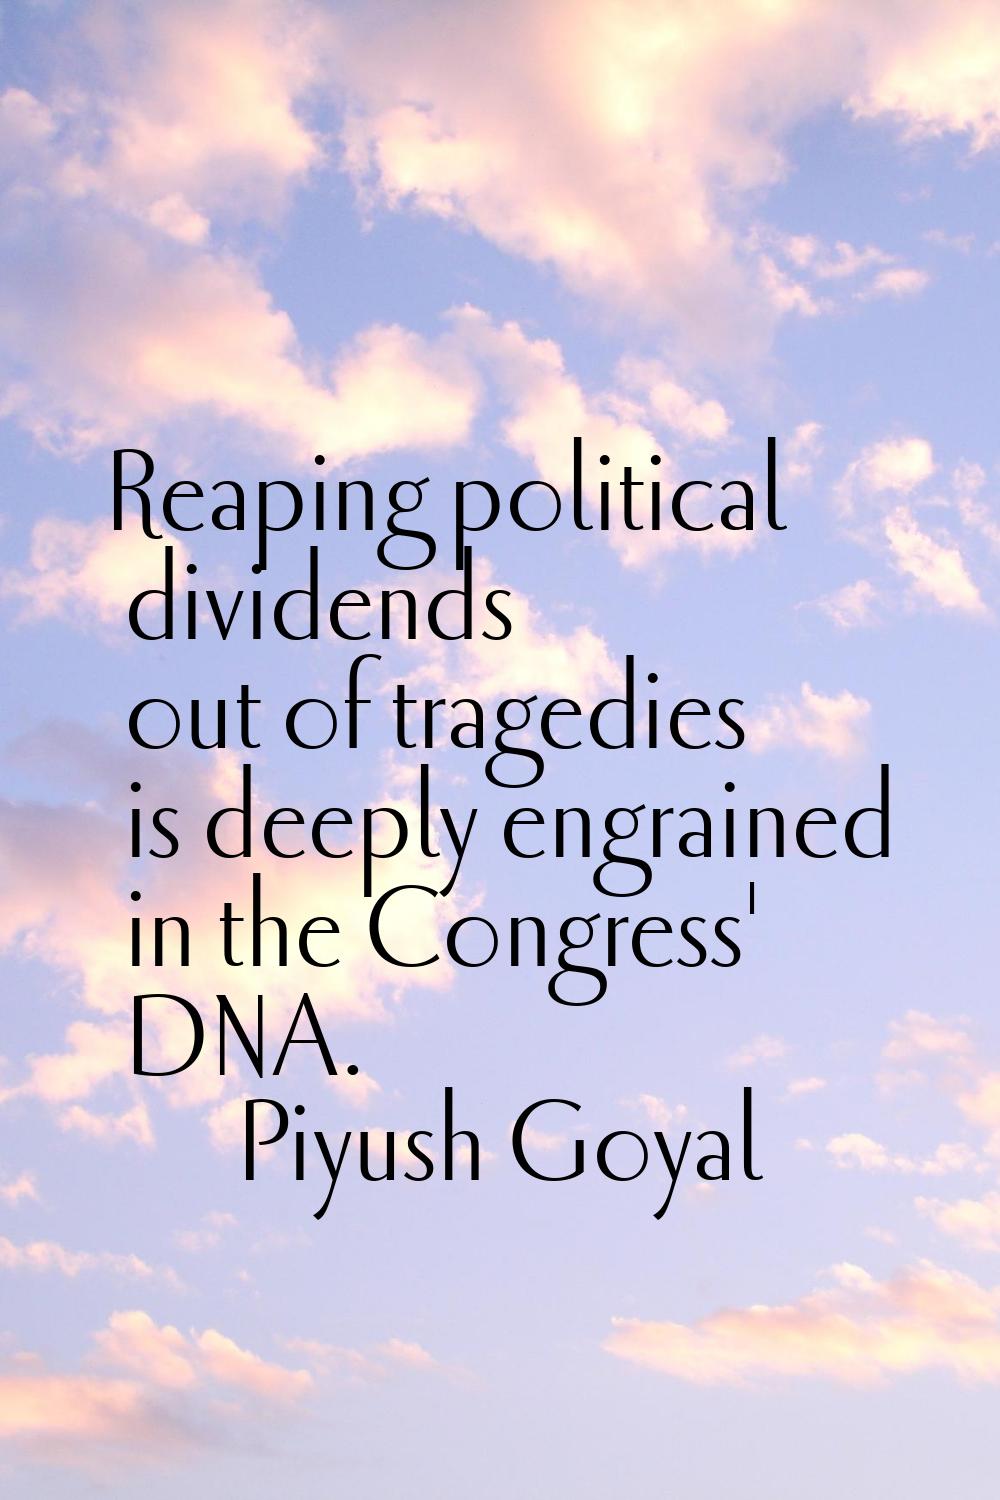 Reaping political dividends out of tragedies is deeply engrained in the Congress' DNA.